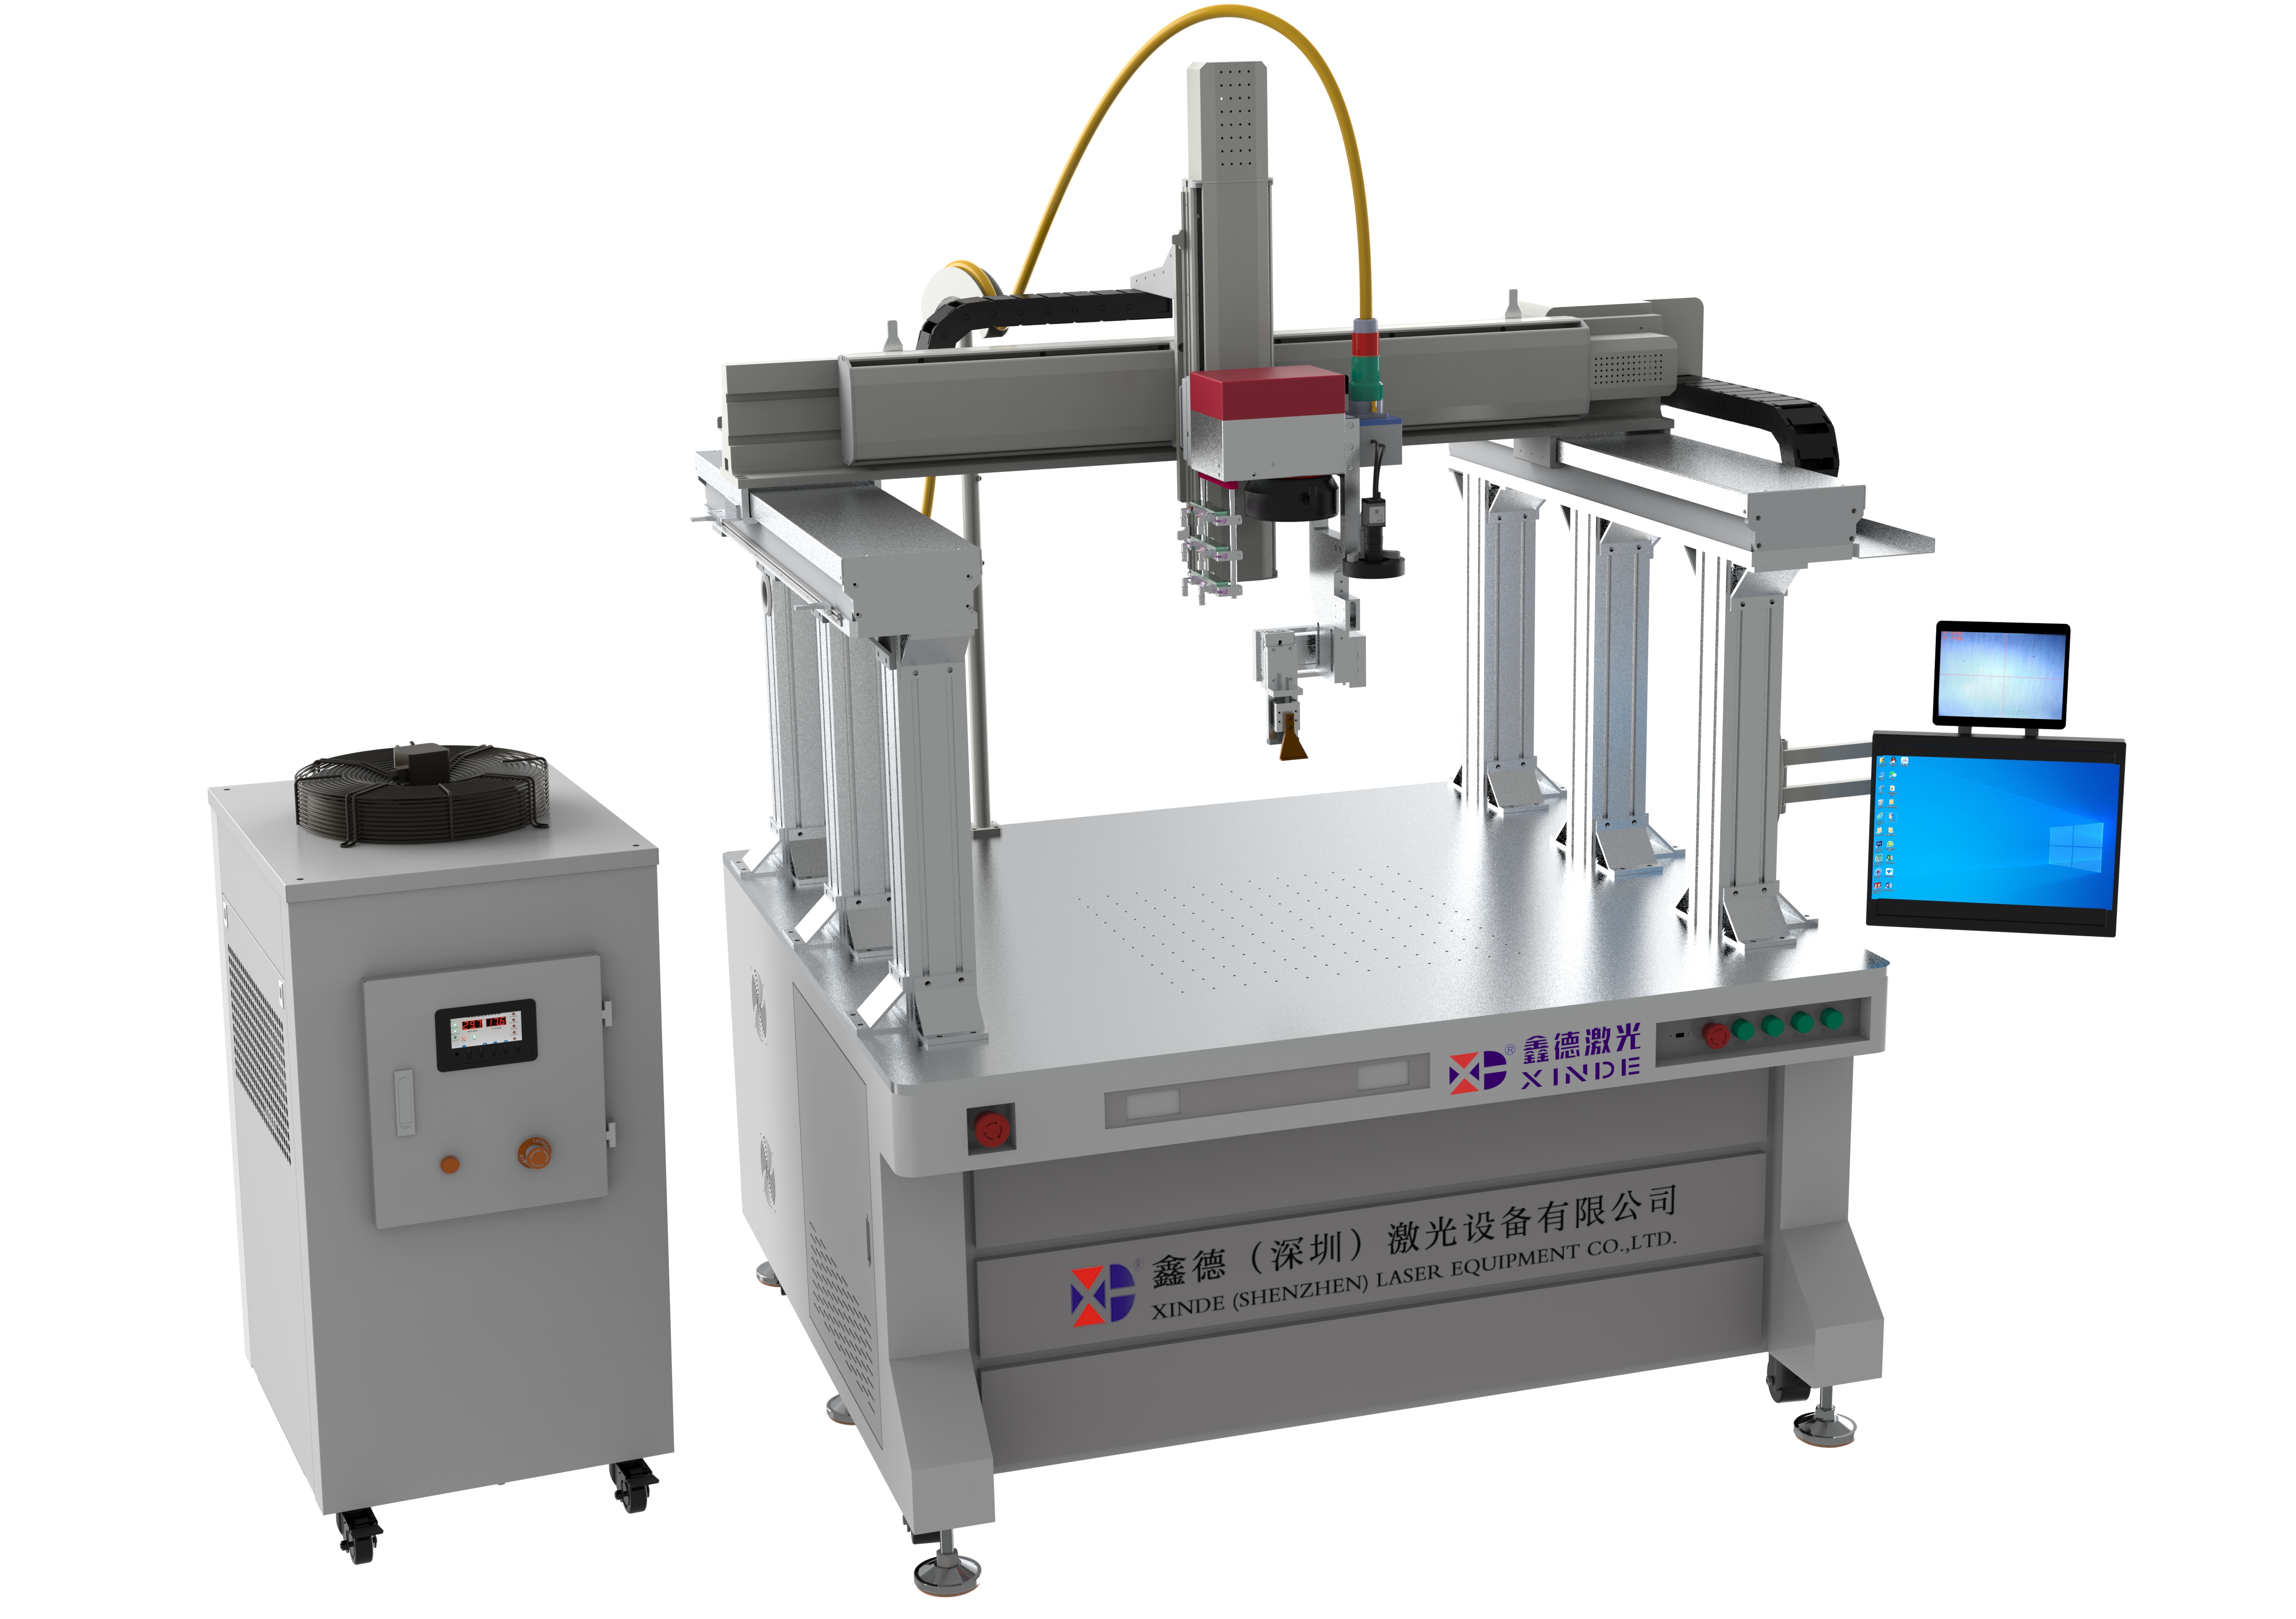 Welding application and advantages of enclosed gantry galvanometer continuous laser welding machine